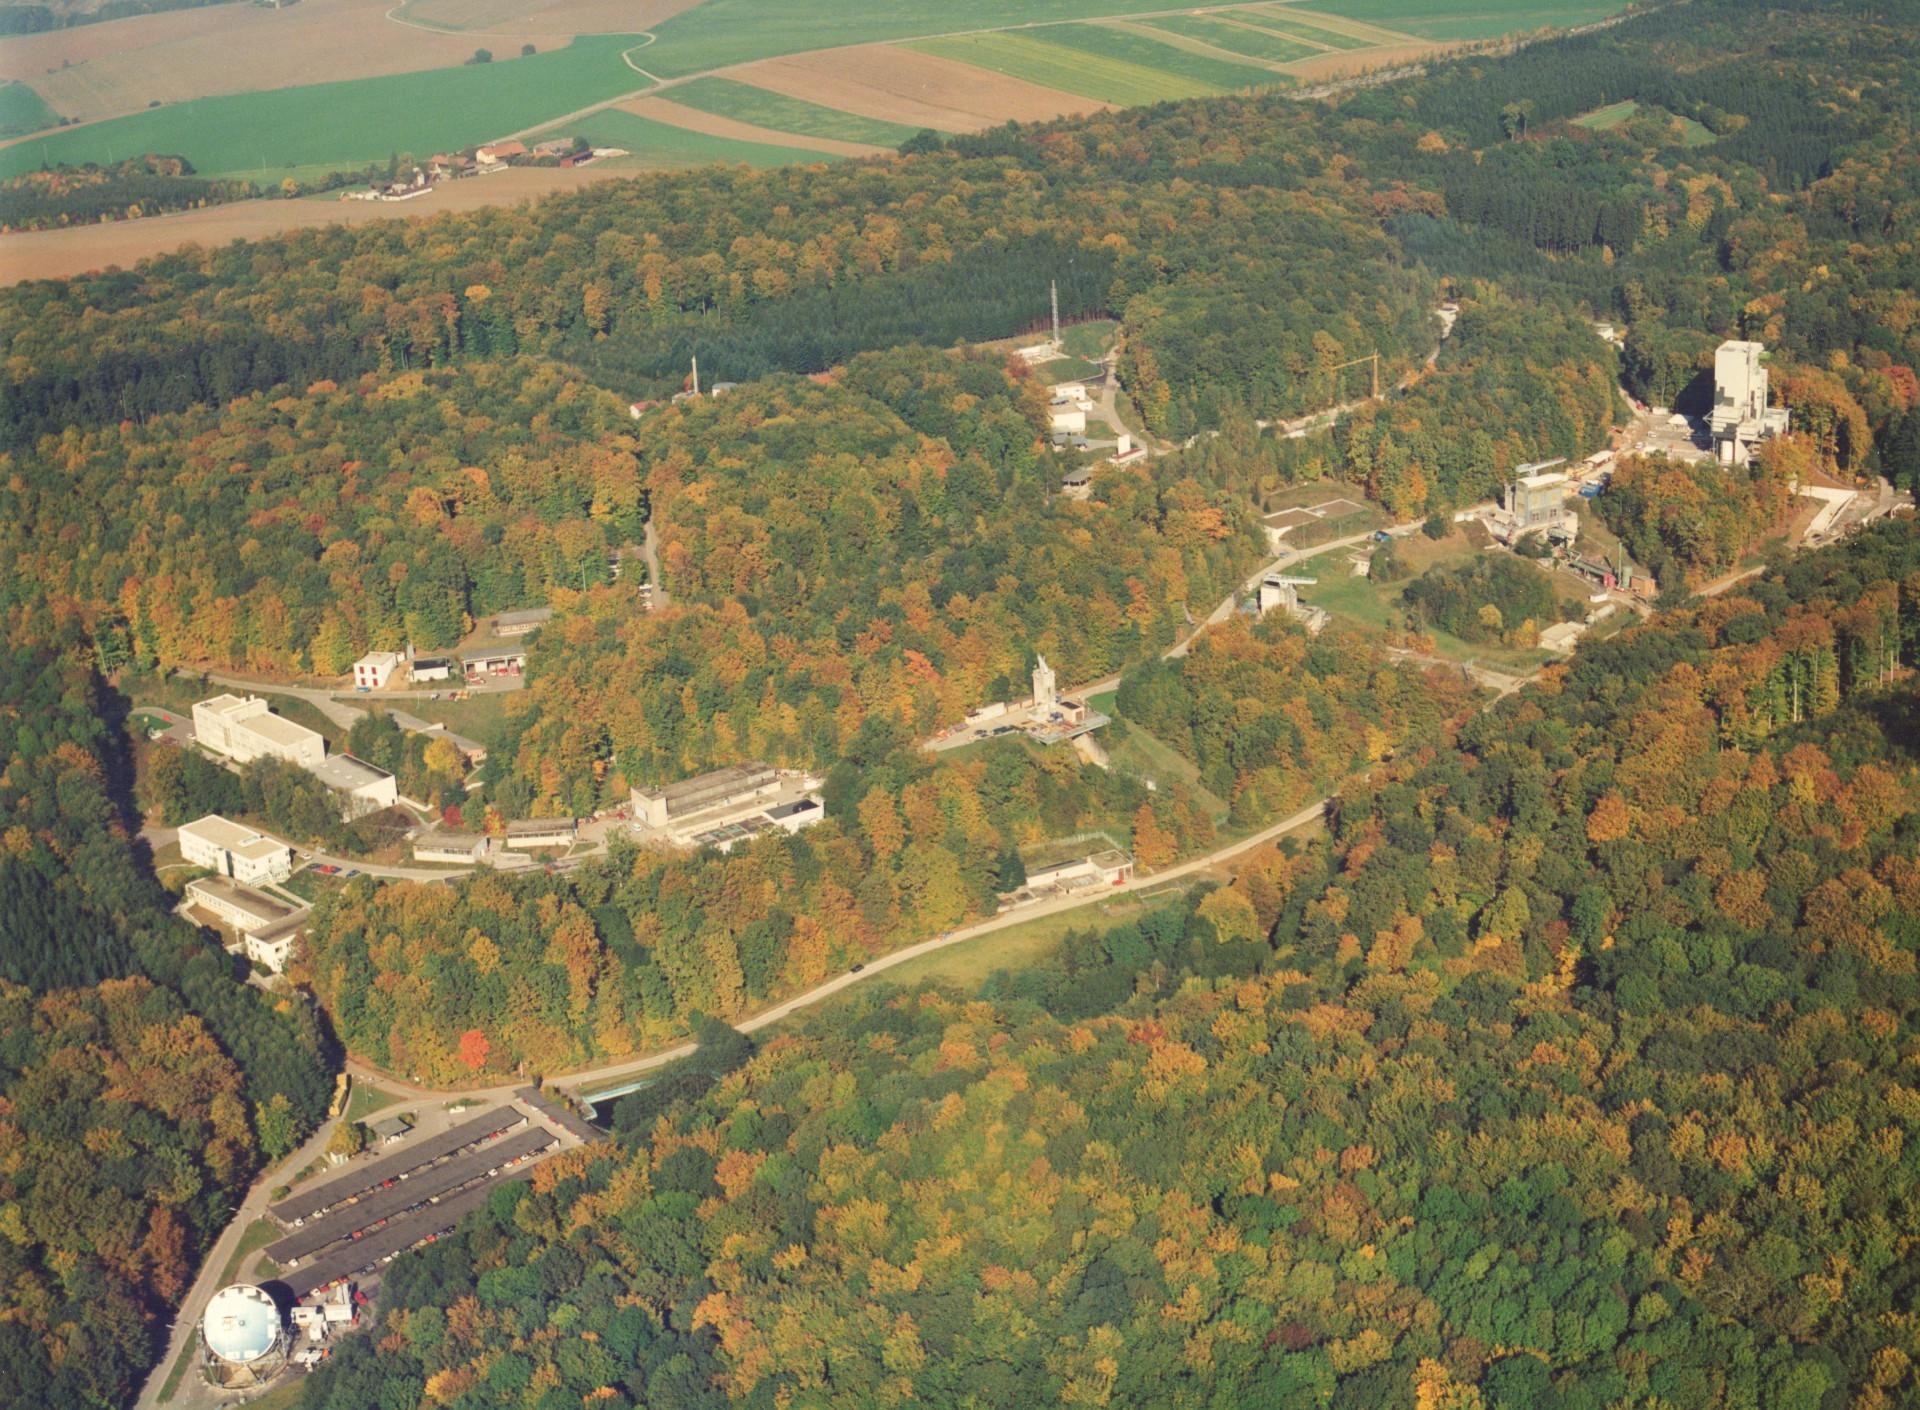 Aerial photograph of the Lampoldshausen location